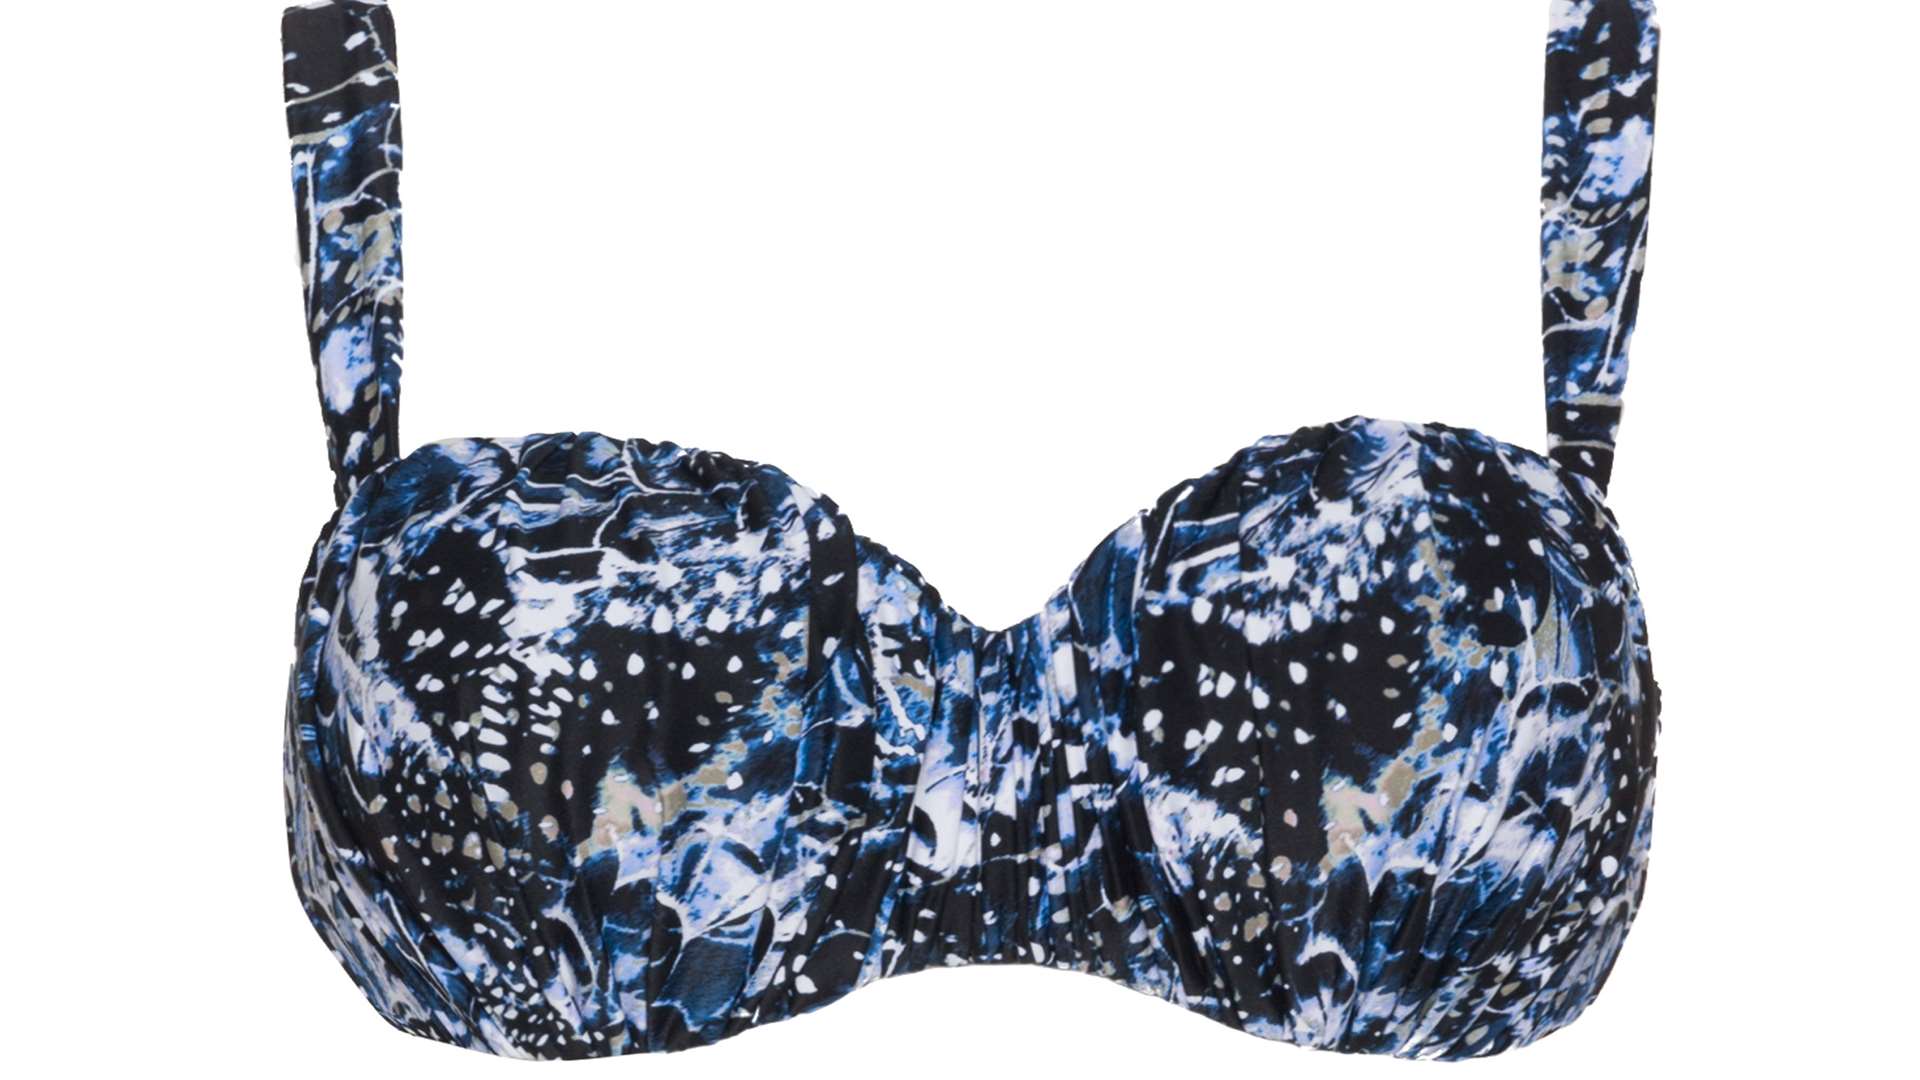 The Robyn Lawley printed underwired bikini top, available from navabi.co.uk